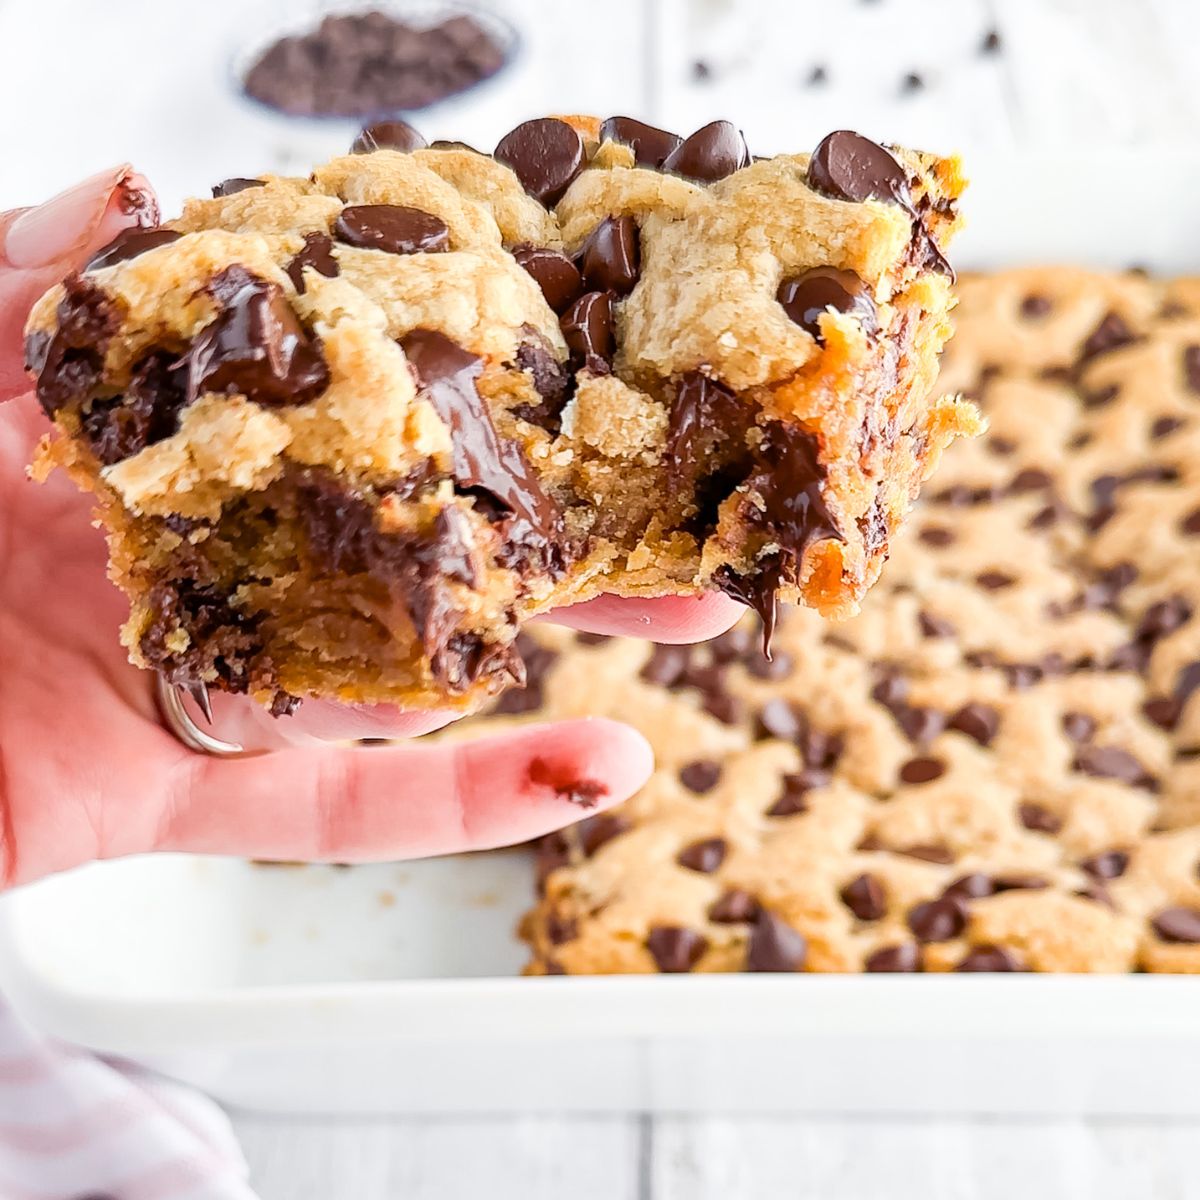 A hand holding a peanut butter chocolate chip cookie bar.